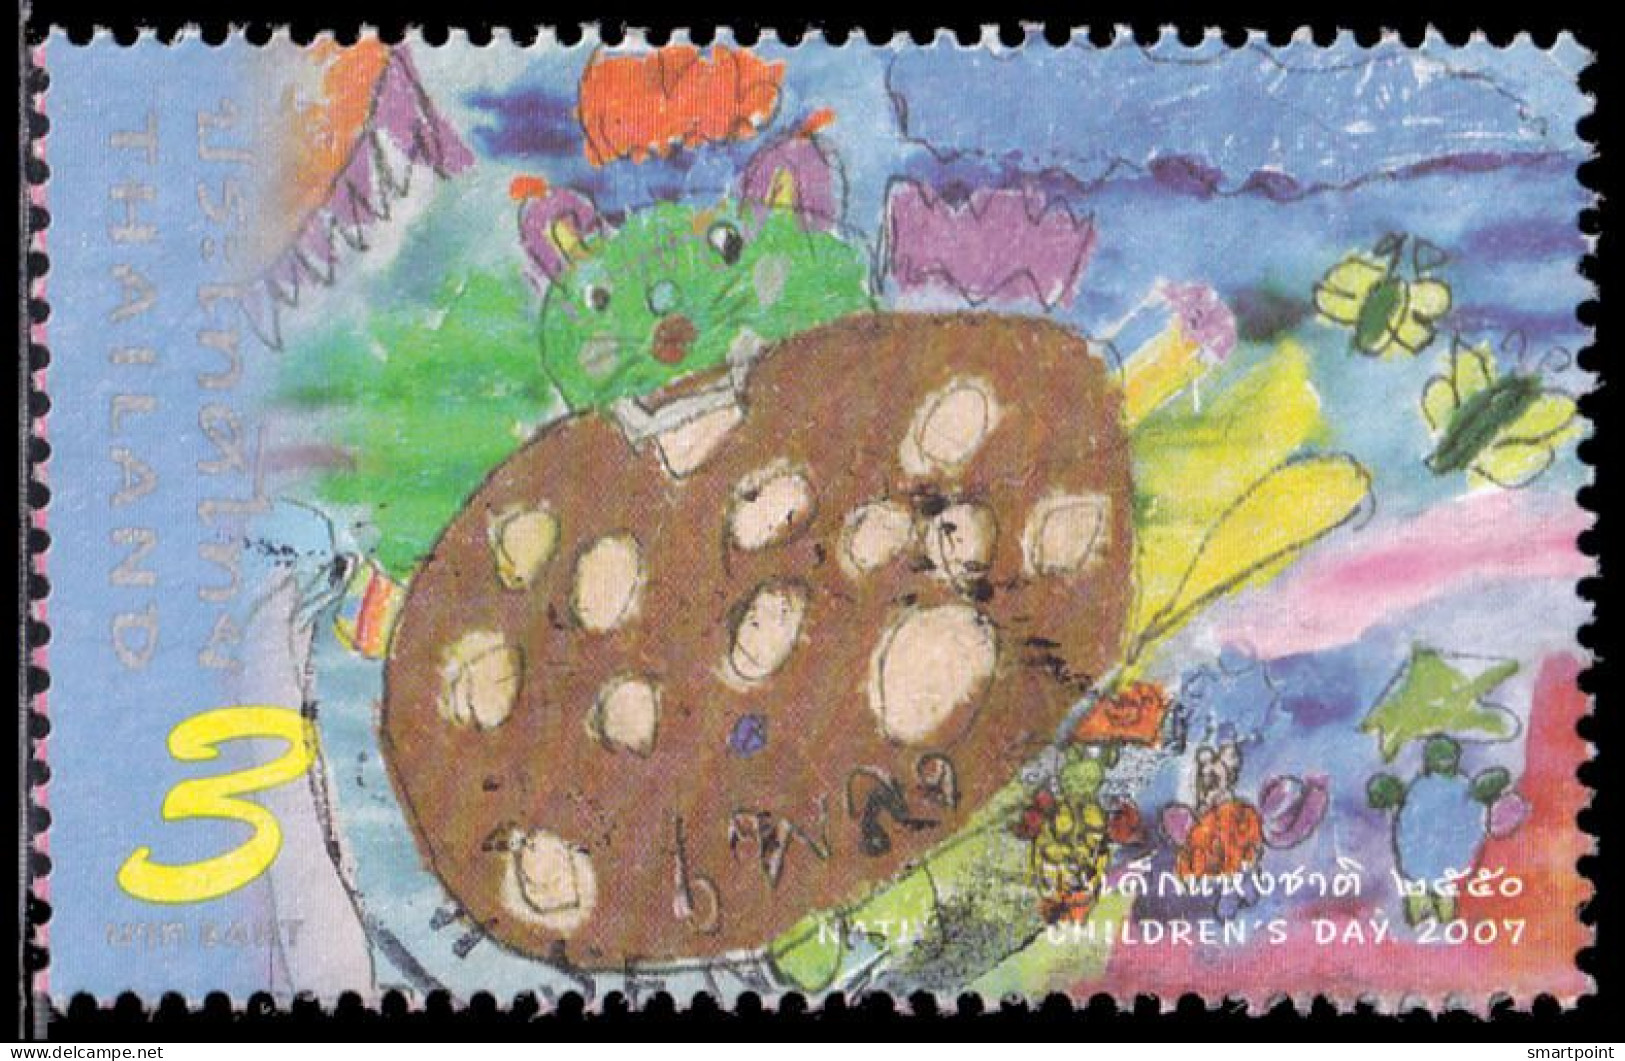 Thailand Stamp 2007 National Children's Day 3 Baht - Used - Thailand